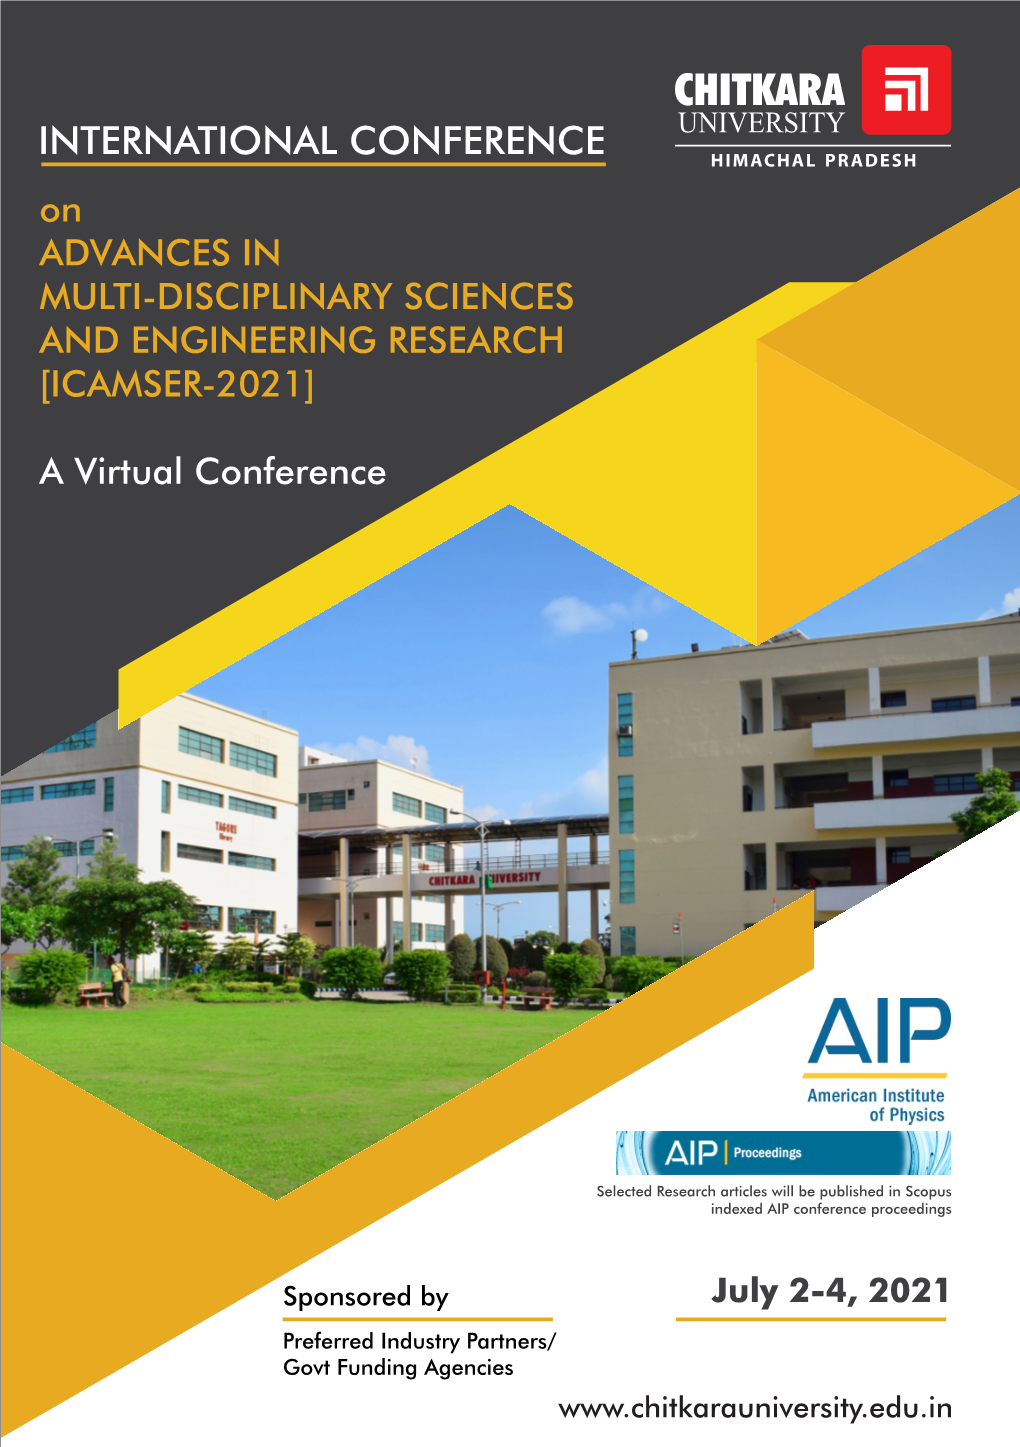 INTERNATIONAL CONFERENCE on ADVANCES in MULTI-DISCIPLINARY SCIENCES and ENGINEERING RESEARCH [ICAMSER-2021]